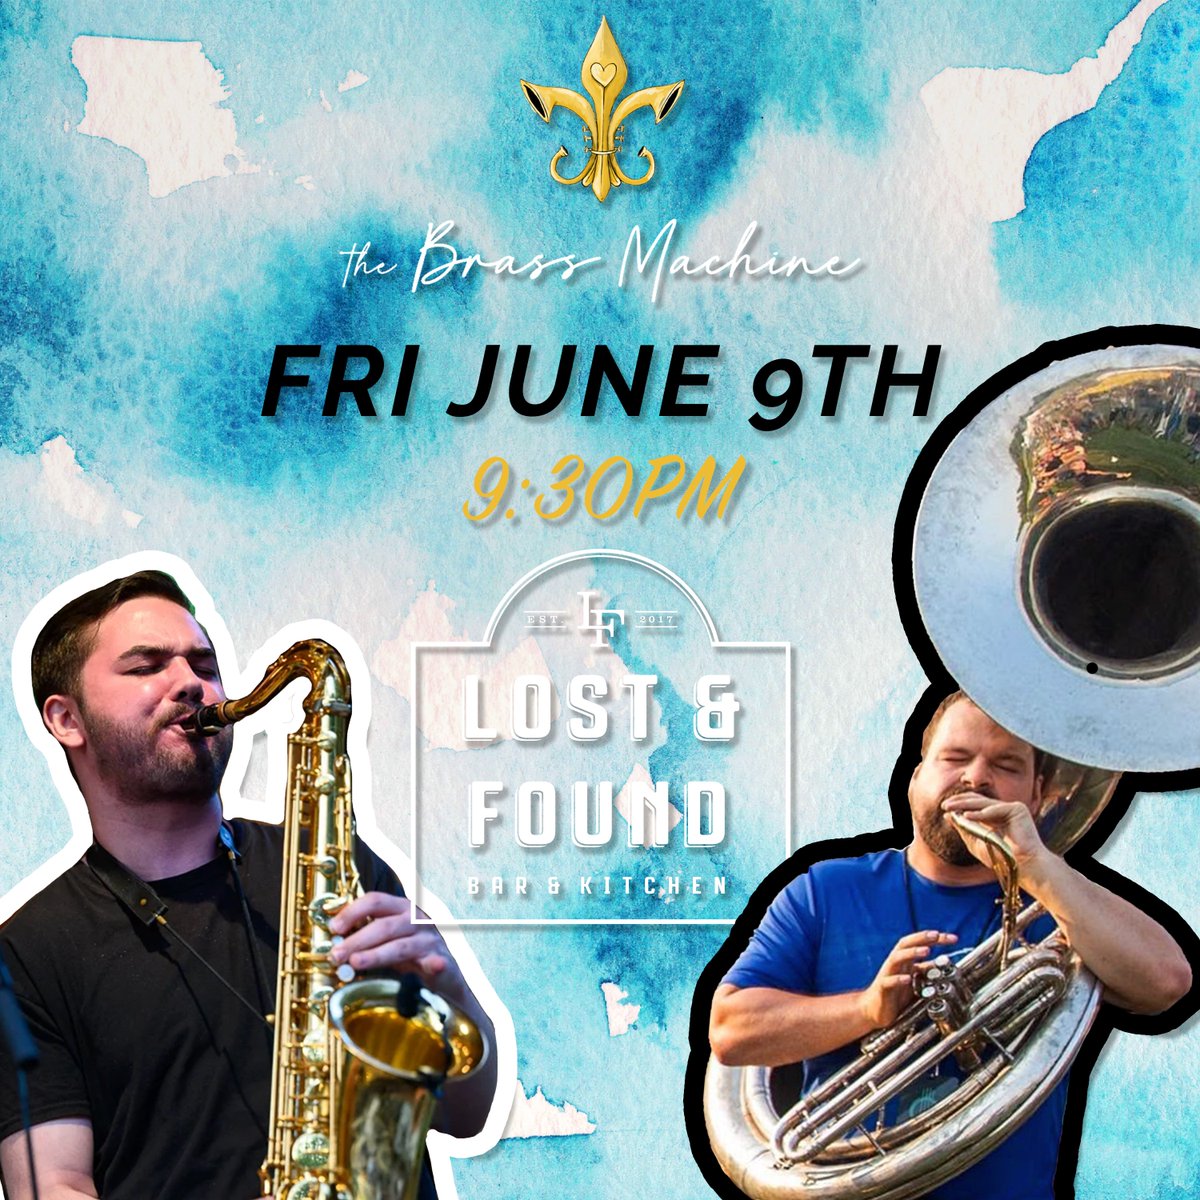 THIS FRIDAY🍻 We are bringin' funky brass to downtown Albany! We'll be at Lost & Found Albany starting around 9:30pm, come party w the Brass Machine!⚜️

#albany #albanymusic #jamband #neworleans #funk #funky #nysmusic #nippertown #explorealbany #downtownalbany